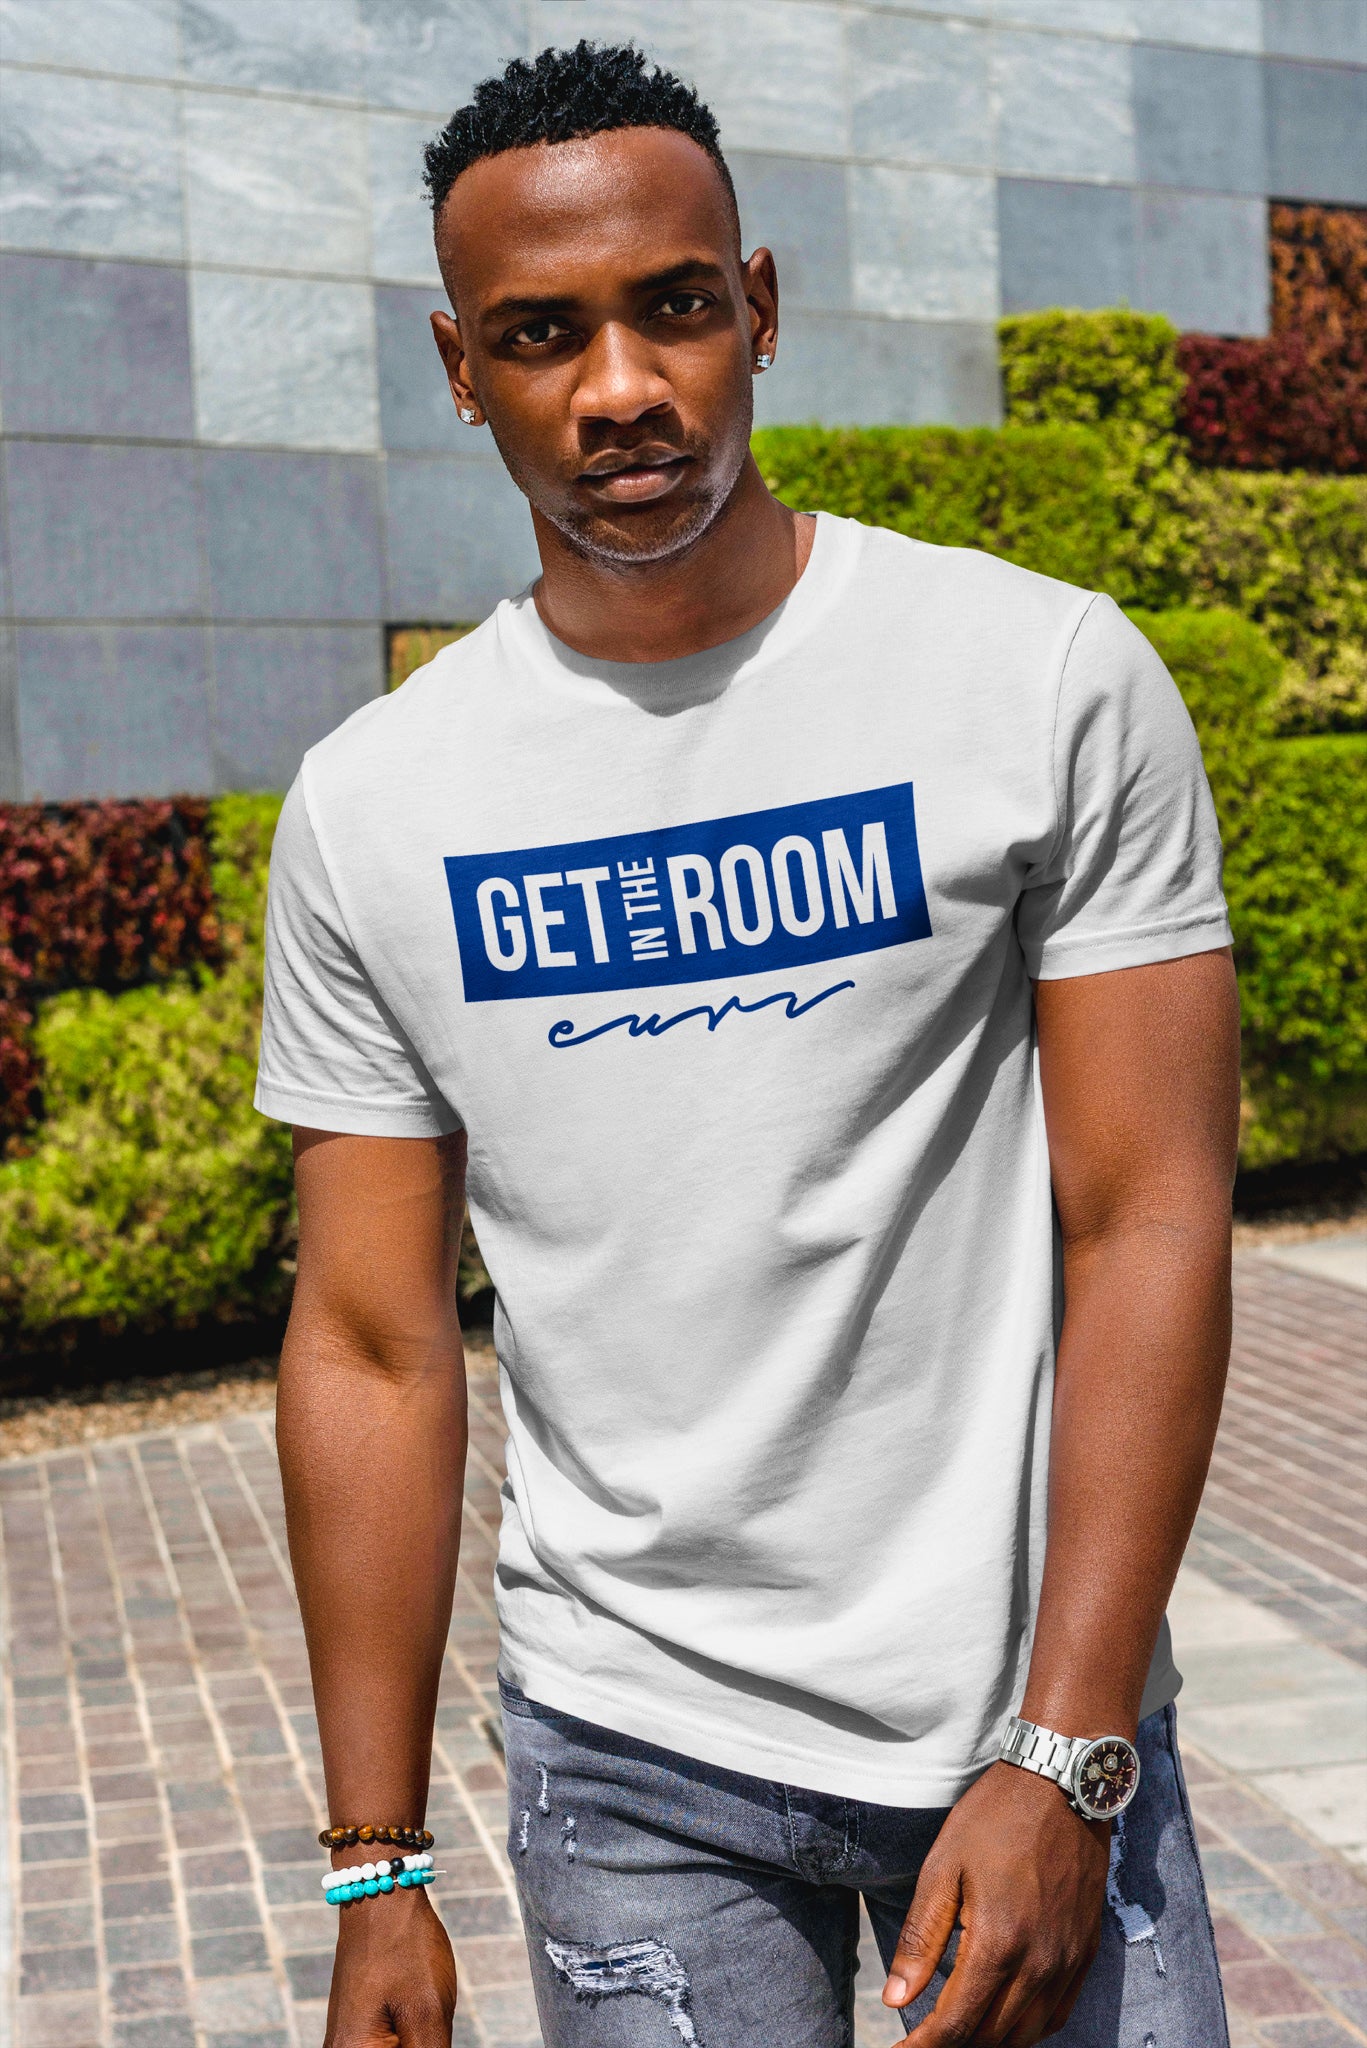 Get In The Room - Euri Clothing